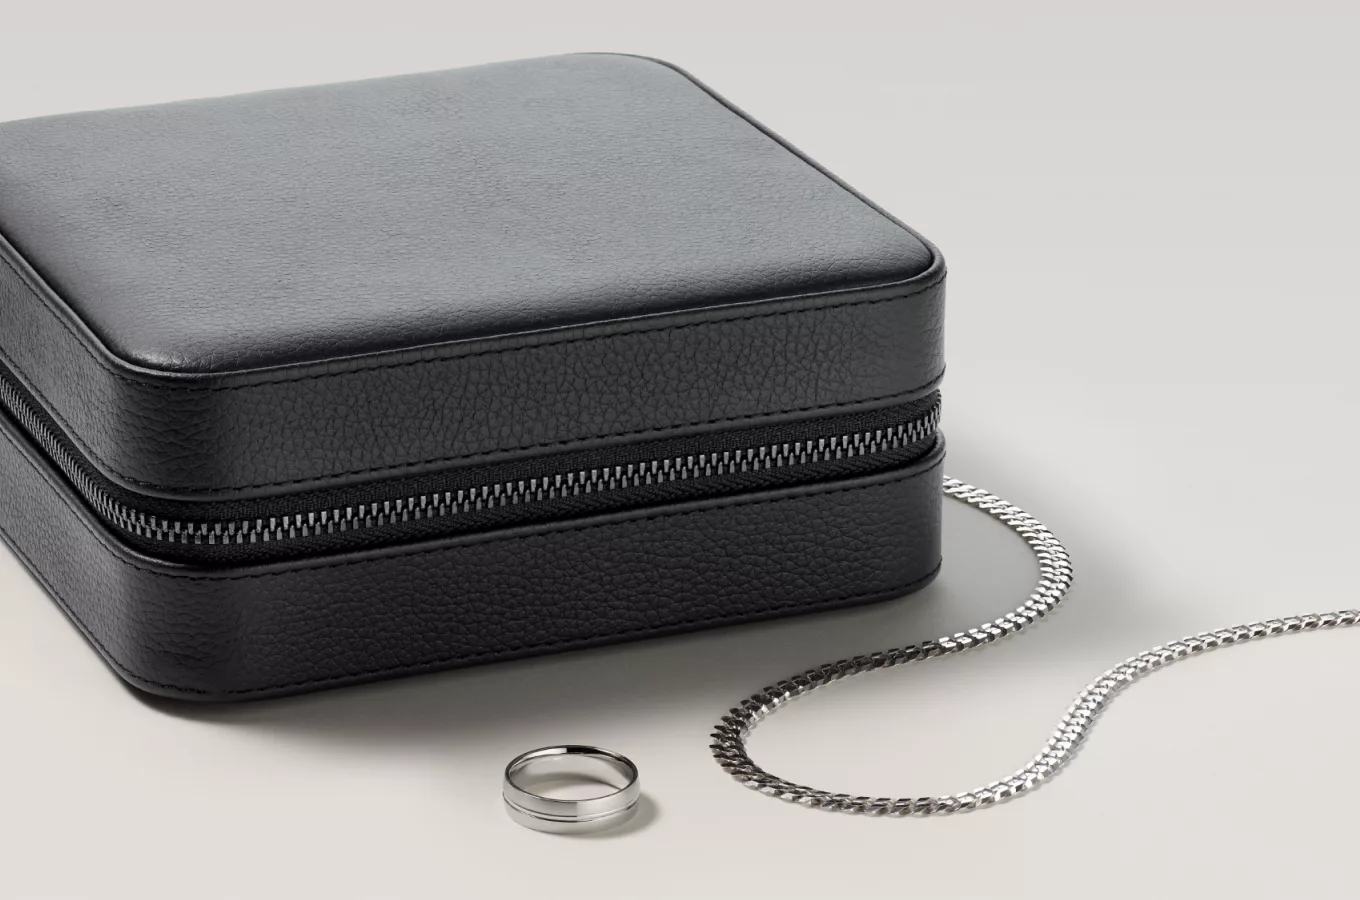 mens white gold chain and white gold wedding band next to a black leather jewelry case. Medium Leather Jewelry Case
Whether traveling from work to the gym, or tagging along in your carry-on, this leather jewelry case is the perfect way to organize and protect your fine jewelry collection every day. It features a stylish black pebbled leather exterior and a soft suede interior with various compartments, including a detachable earring bar, ring rolls, and enough space for bangle bracelets and watches. 24 in Mens Miami Cuban Chain in Sterling Silver (8mm)This bold sterling silver chain will be sure to capture attention. Twenty-four inches in length, this Miami Cuban chain is secured by a lobster clasp and a high polished finish adding subtle flair to the 8mm wide design. Contemporary Wedding Band in Tantalum (7mm)
This tantalum wedding band is hypoallergenic, making it perfect for someone with sensitive skin, and will resist scratching and corrosion.